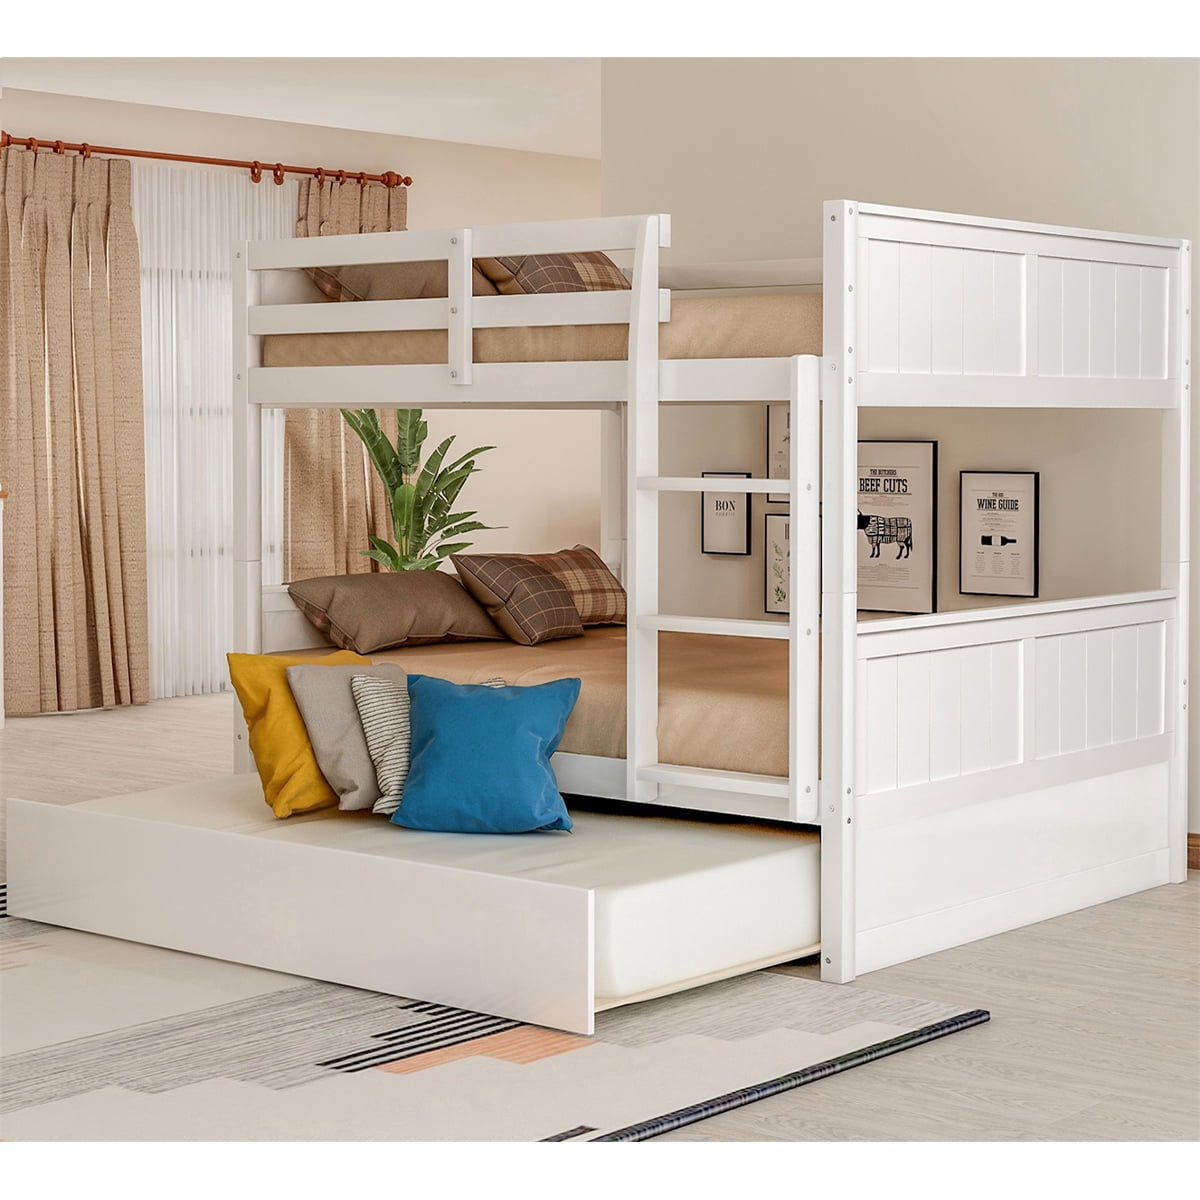 Sentern Full Over Bunk Bed With, Twin Over Full Bunk Bed With Trundle Plans